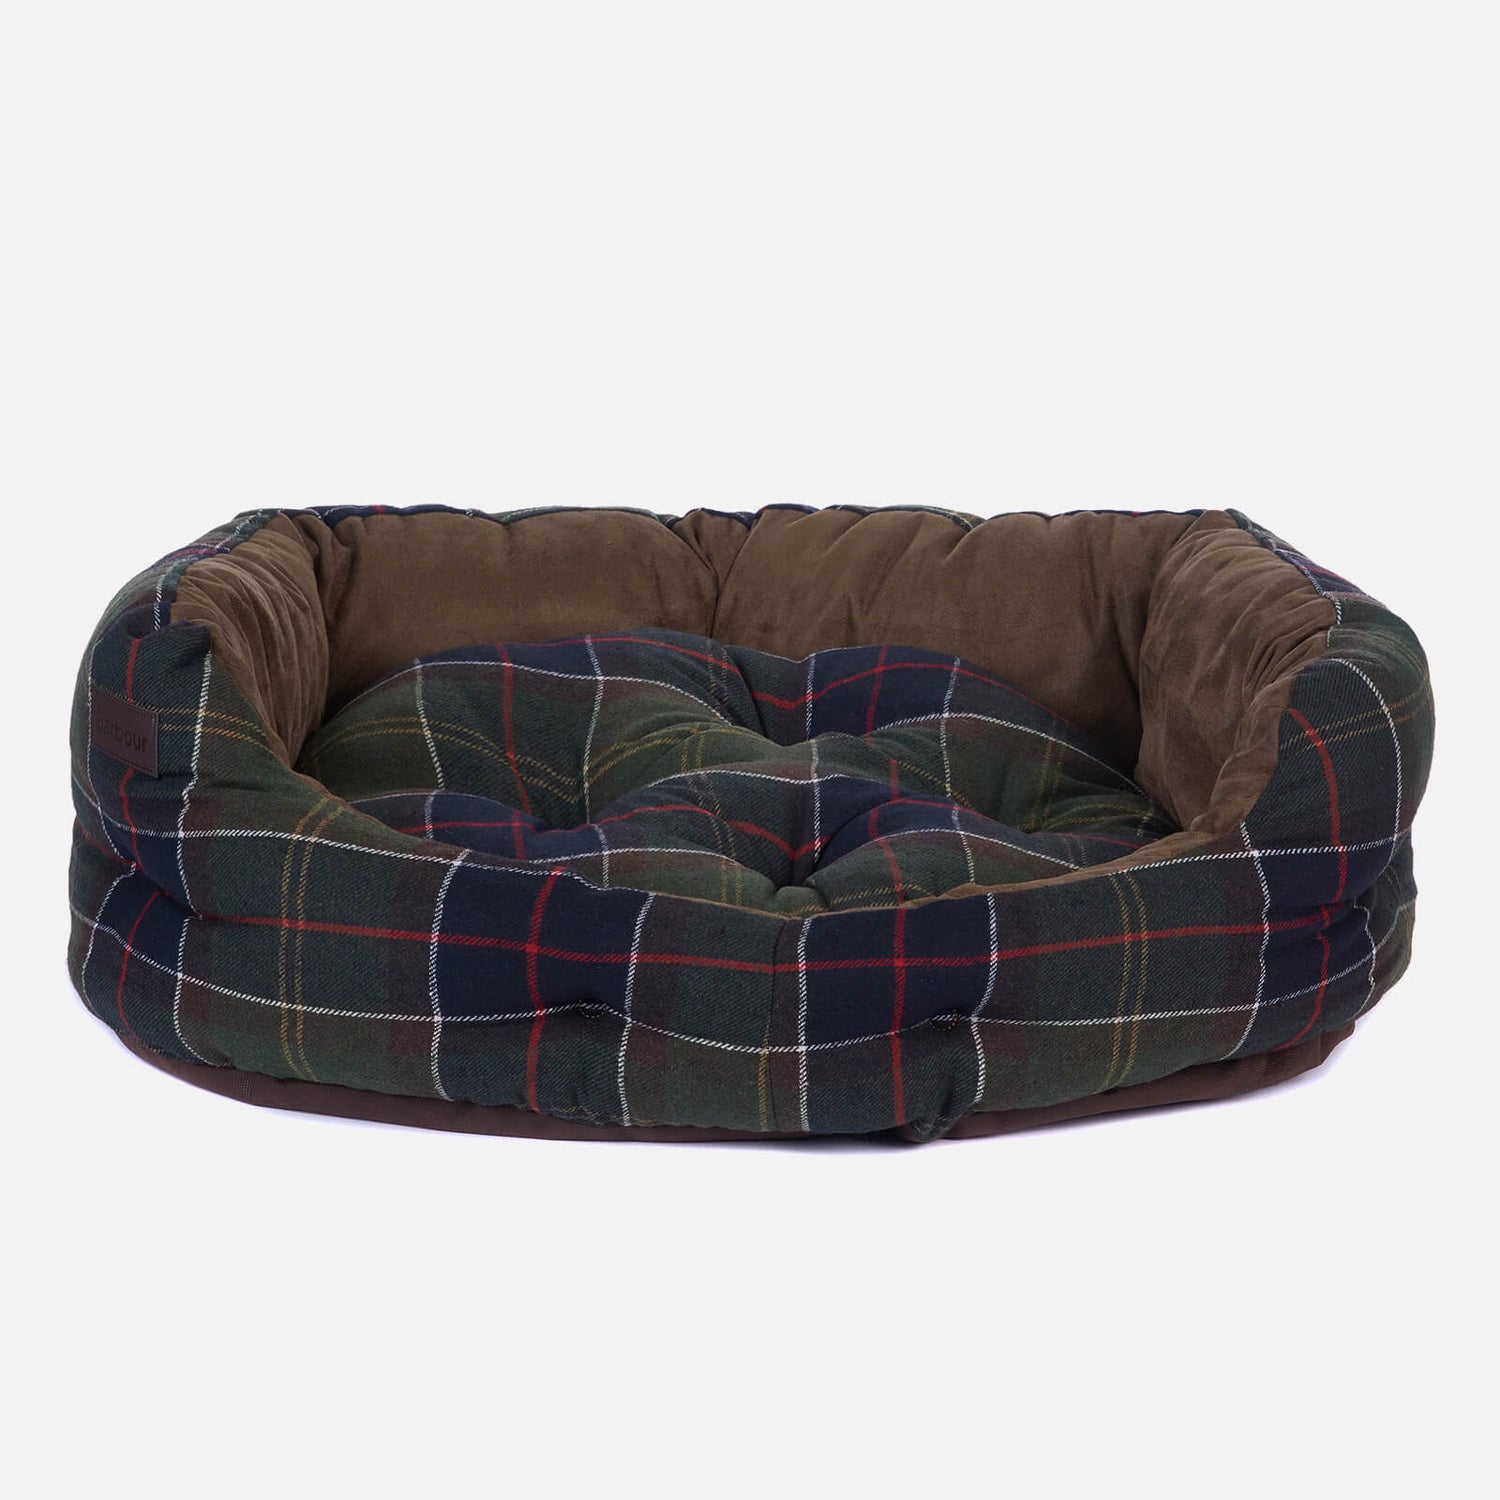 Barbour Dogs Luxury Bed - Classic Tartan - 24 Inch